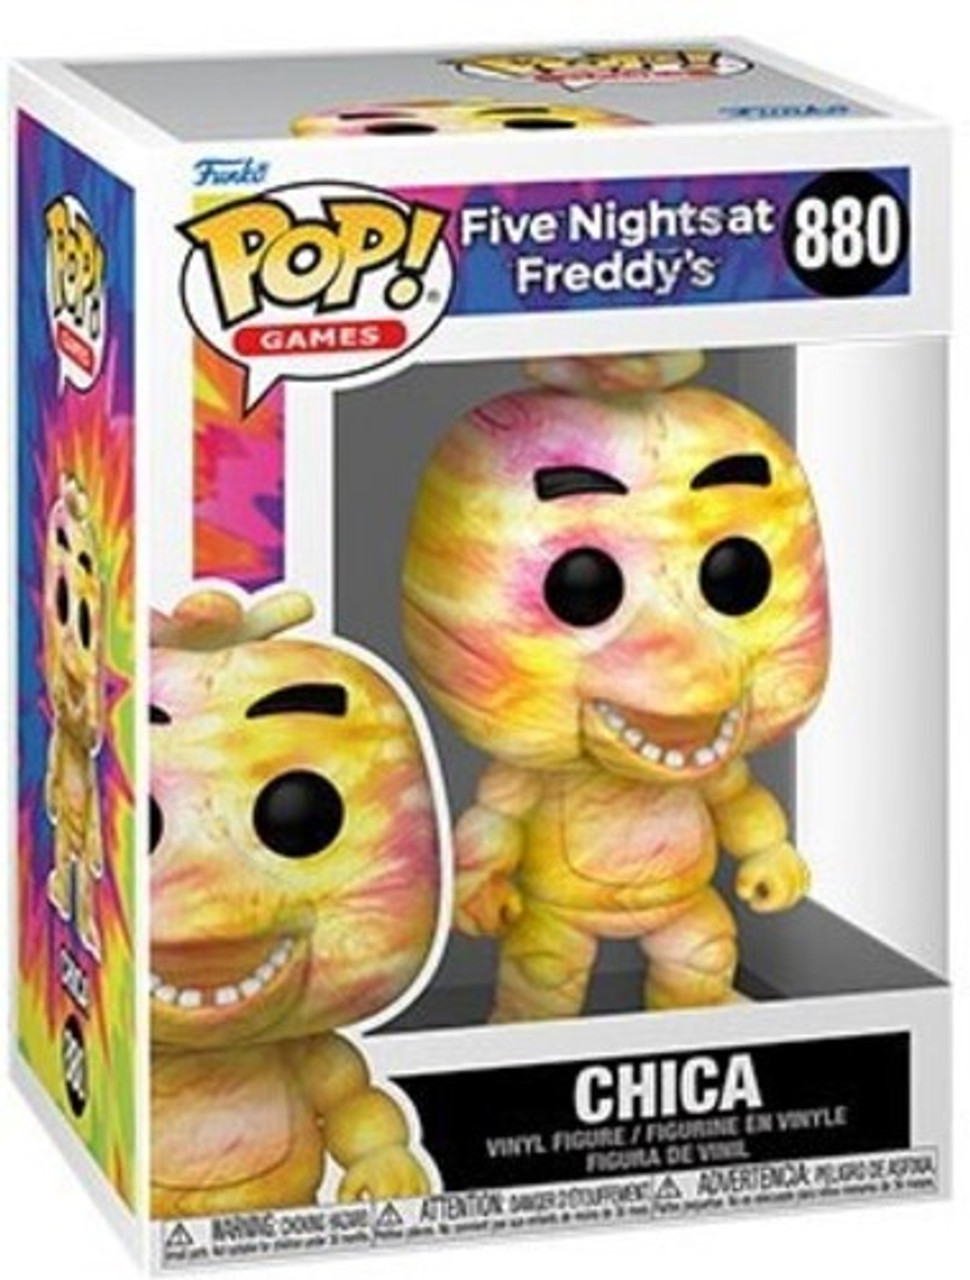 Funko Pop! Five Nights at Freddy's - Balloon Chica #910